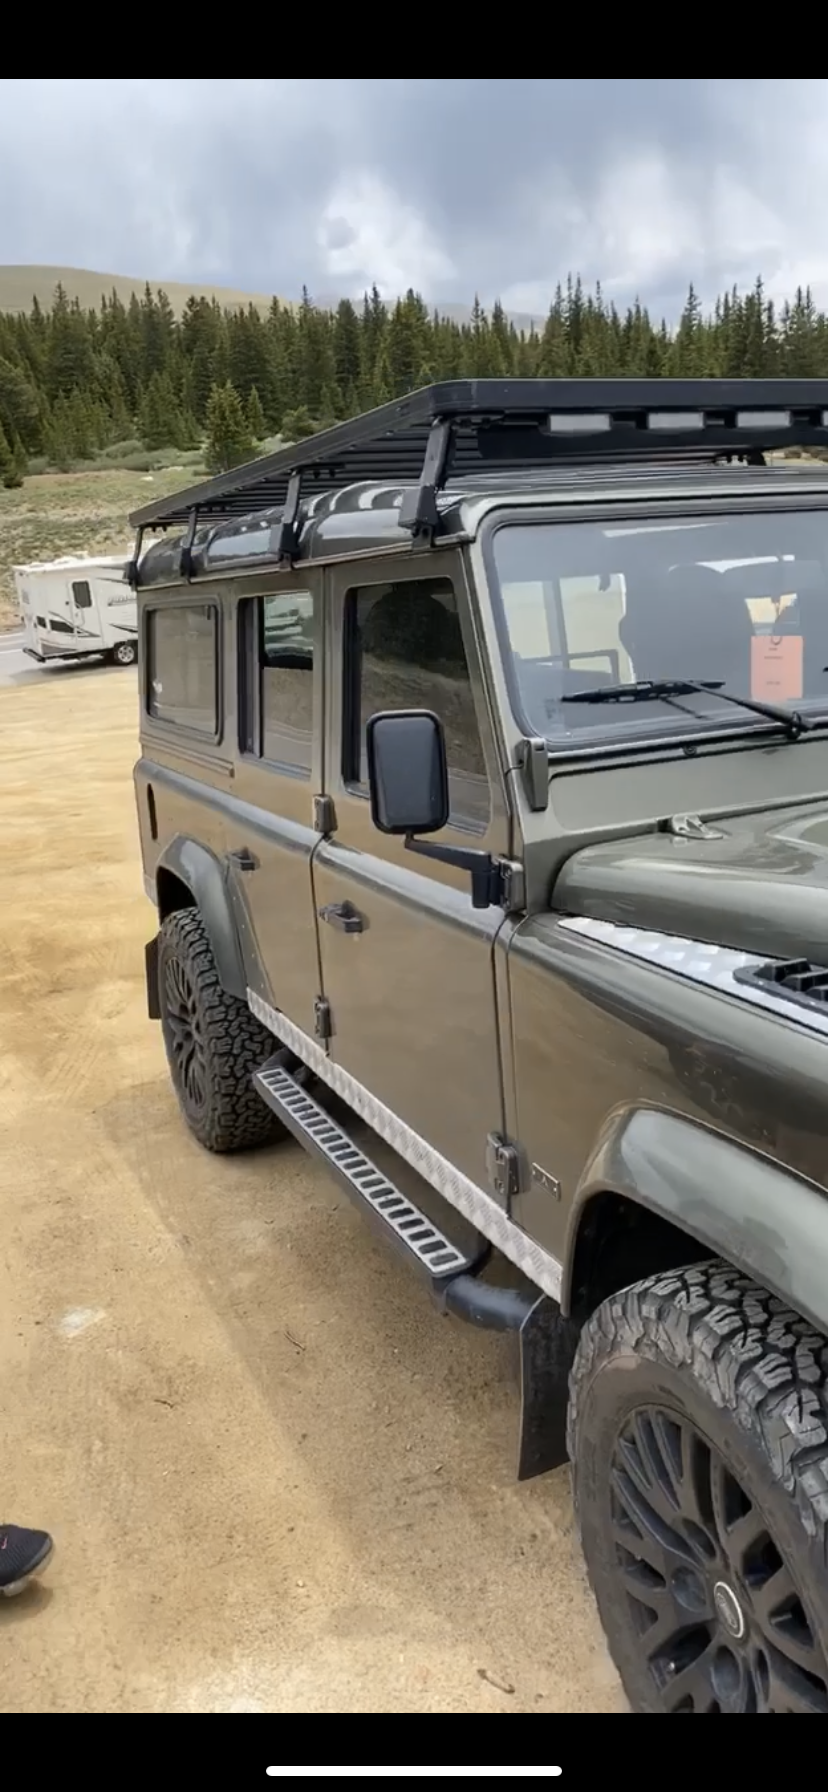 Defender Jumpseat - Land Rover Forums - Land Rover Enthusiast Forum